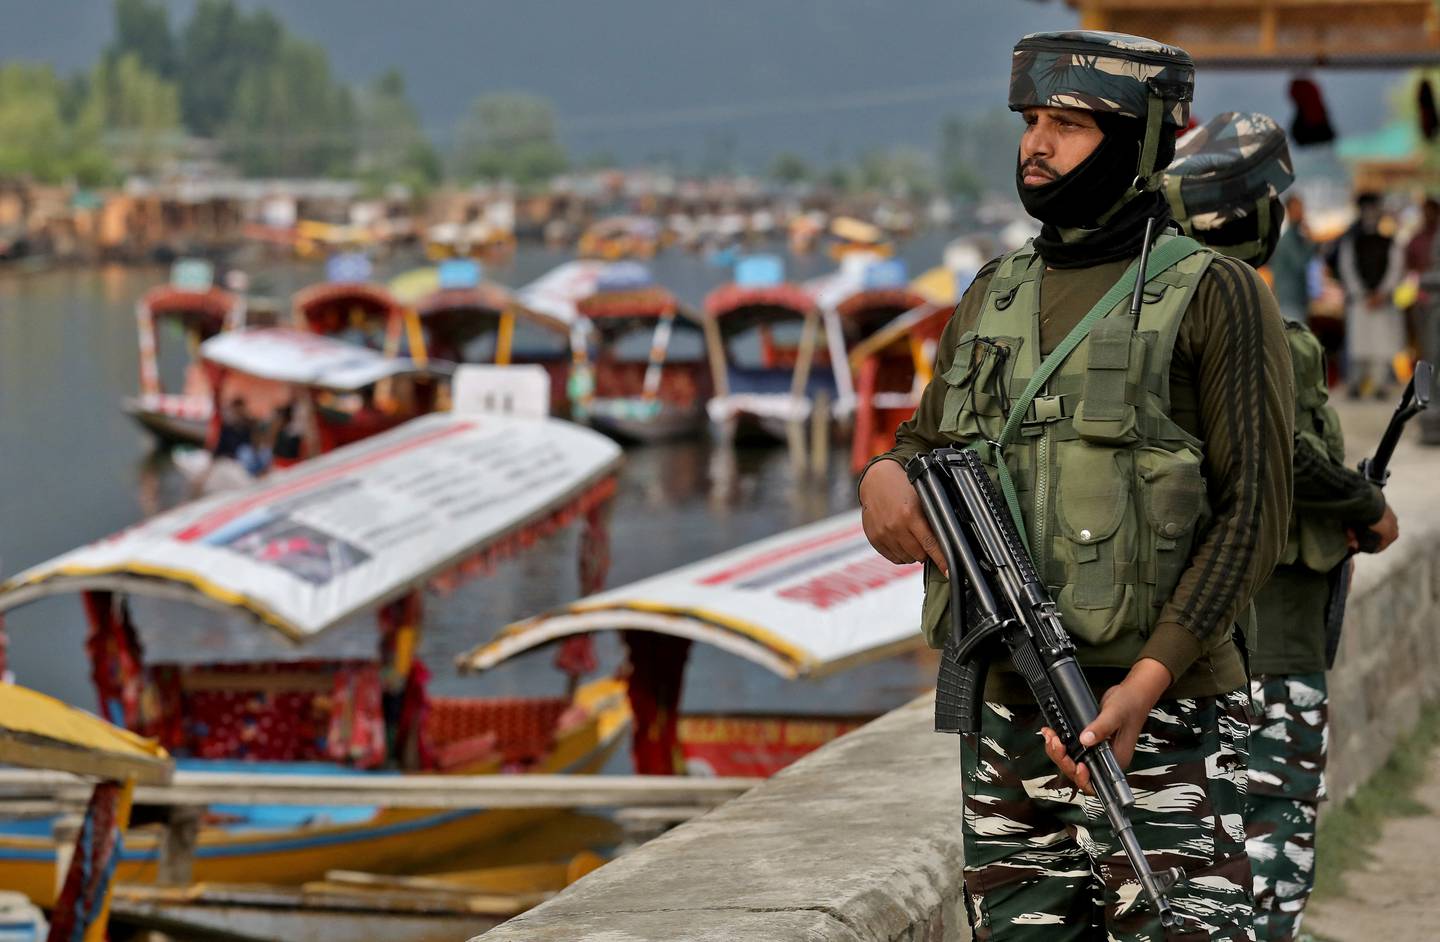 India's Central Reserve Police Force (CRPF) personnel stand guard on the banks of Dal Lake, a famous tourist attraction in Srinagar, Kashmir, on May 26, 2022. Reuters